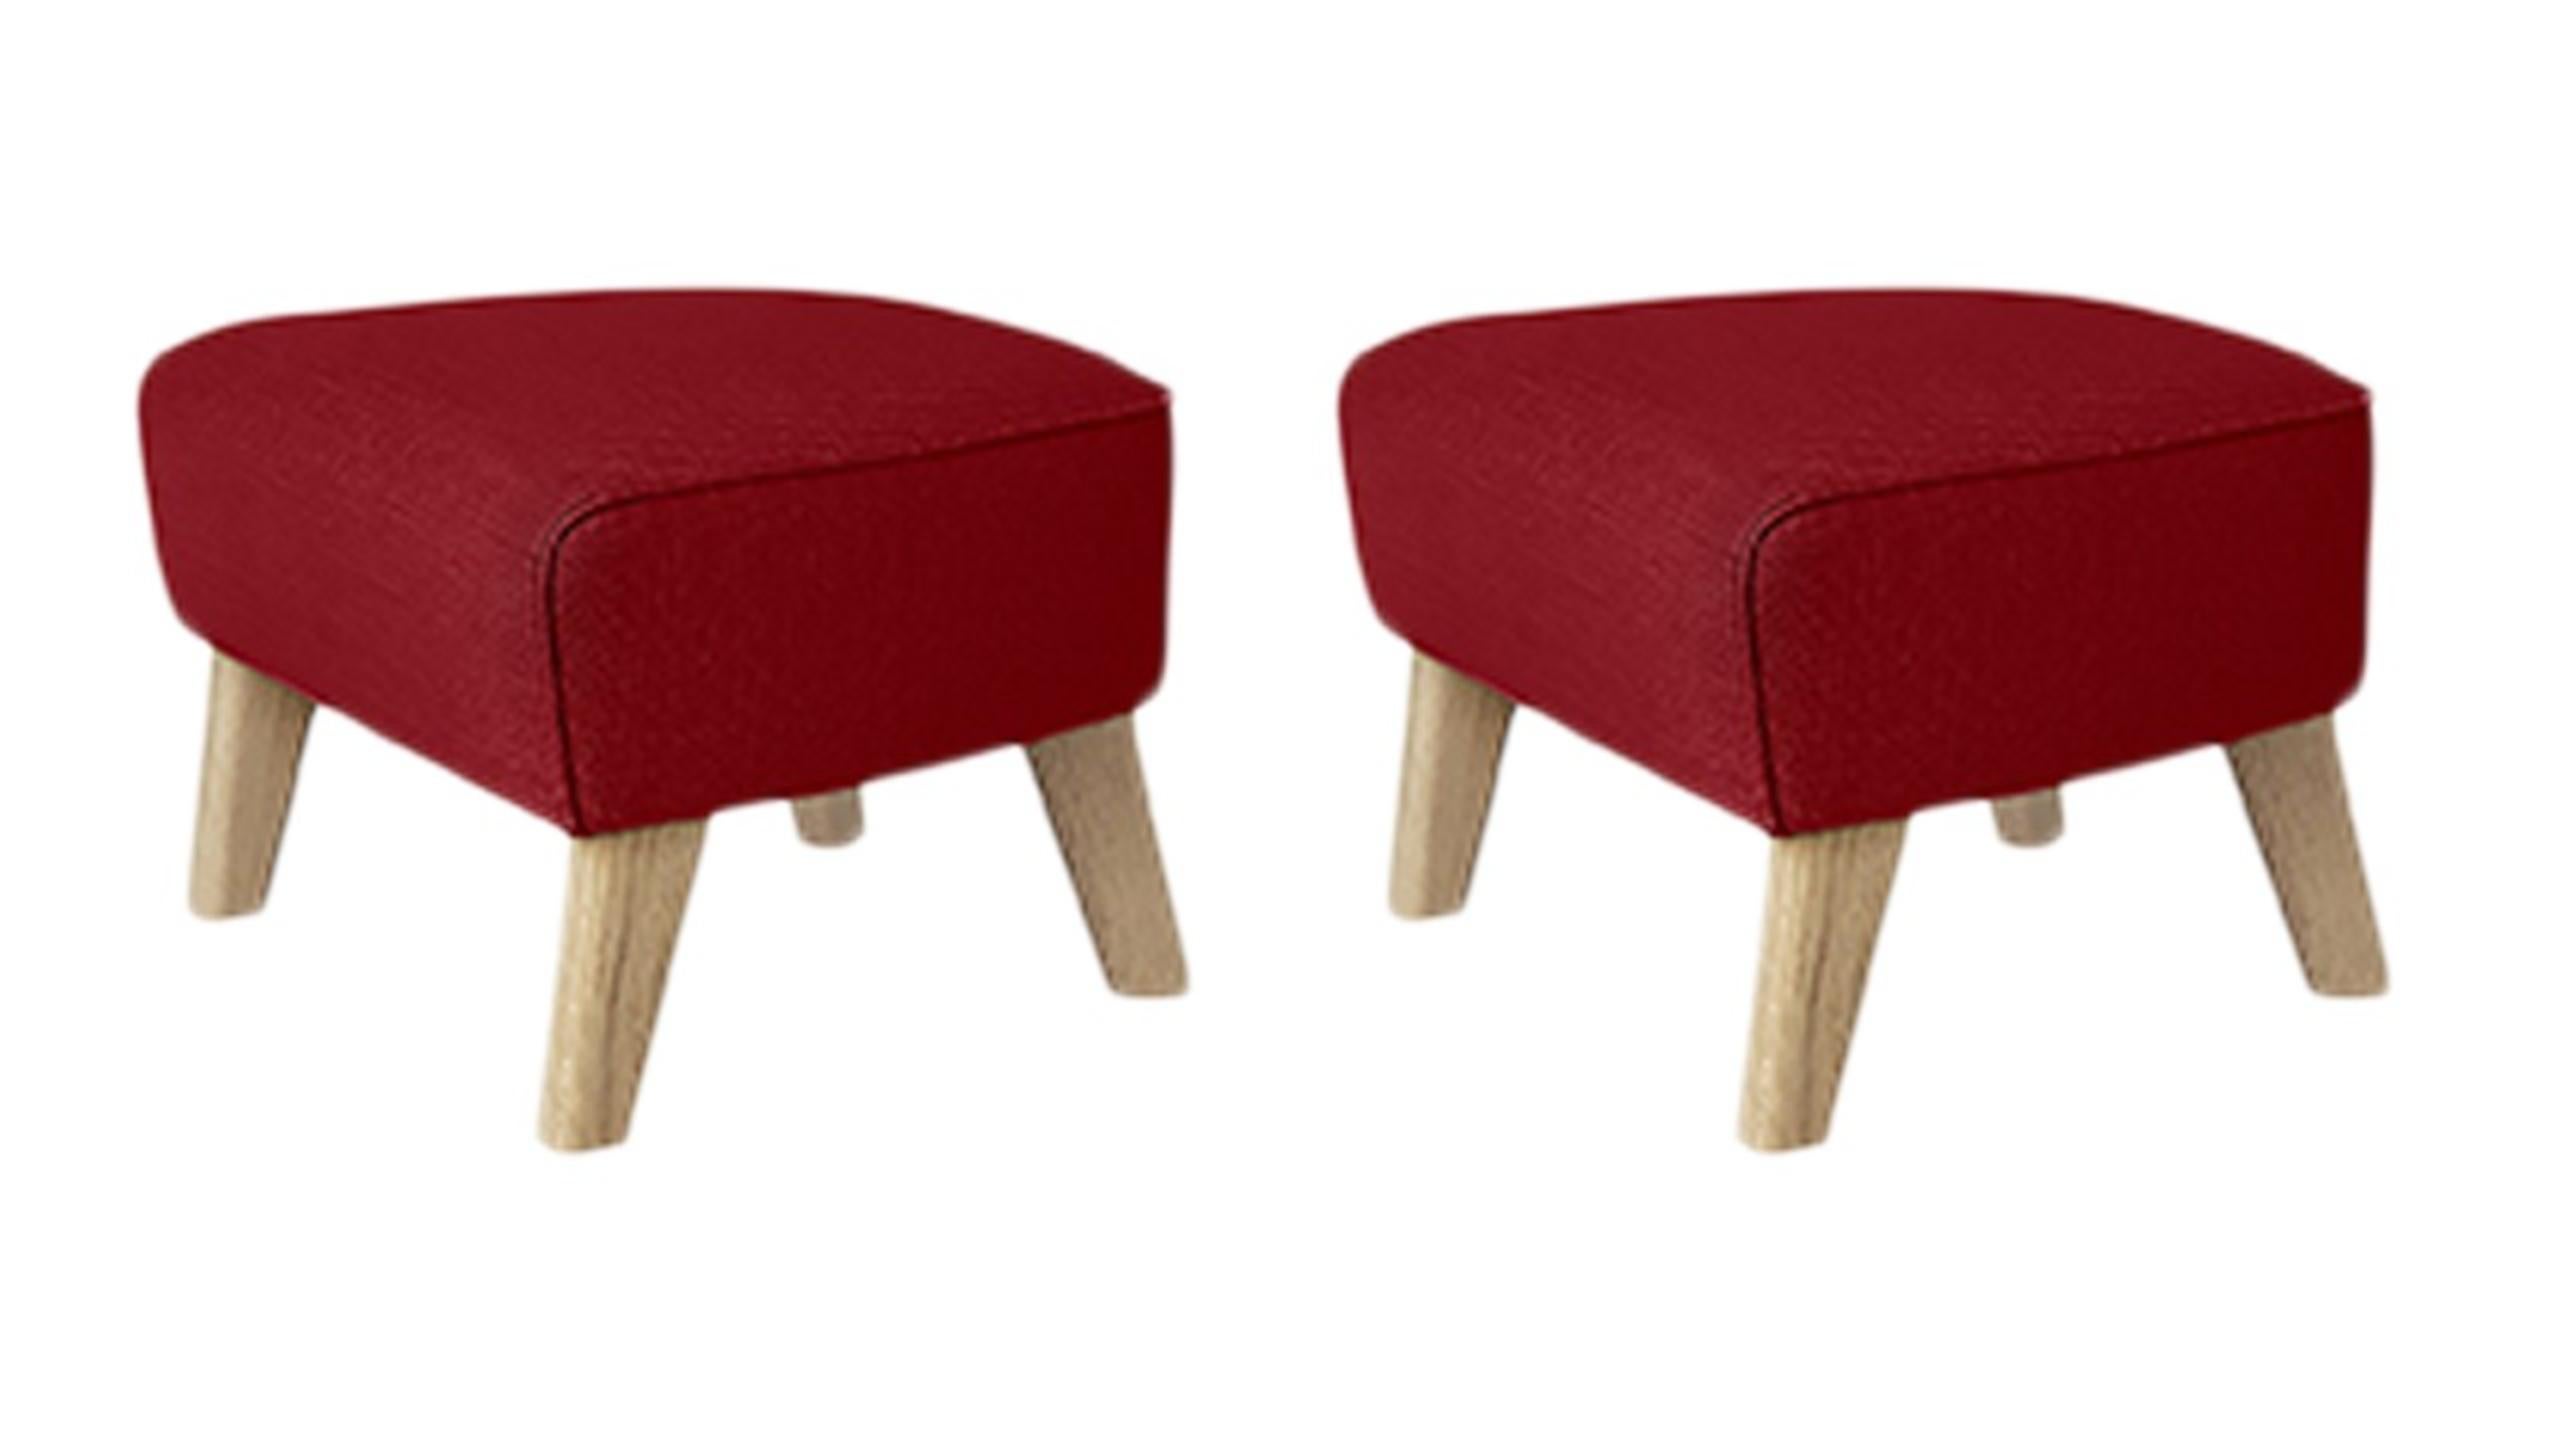 Set of 2 red, natural oak Raf Simons Vidar 3 My Own Chair Footstool by Lassen
Dimensions: W 56 x D 58 x H 40 cm 
Materials: Textile
Also available: Other colors available

The My Own Chair Footstool has been designed in the same spirit as